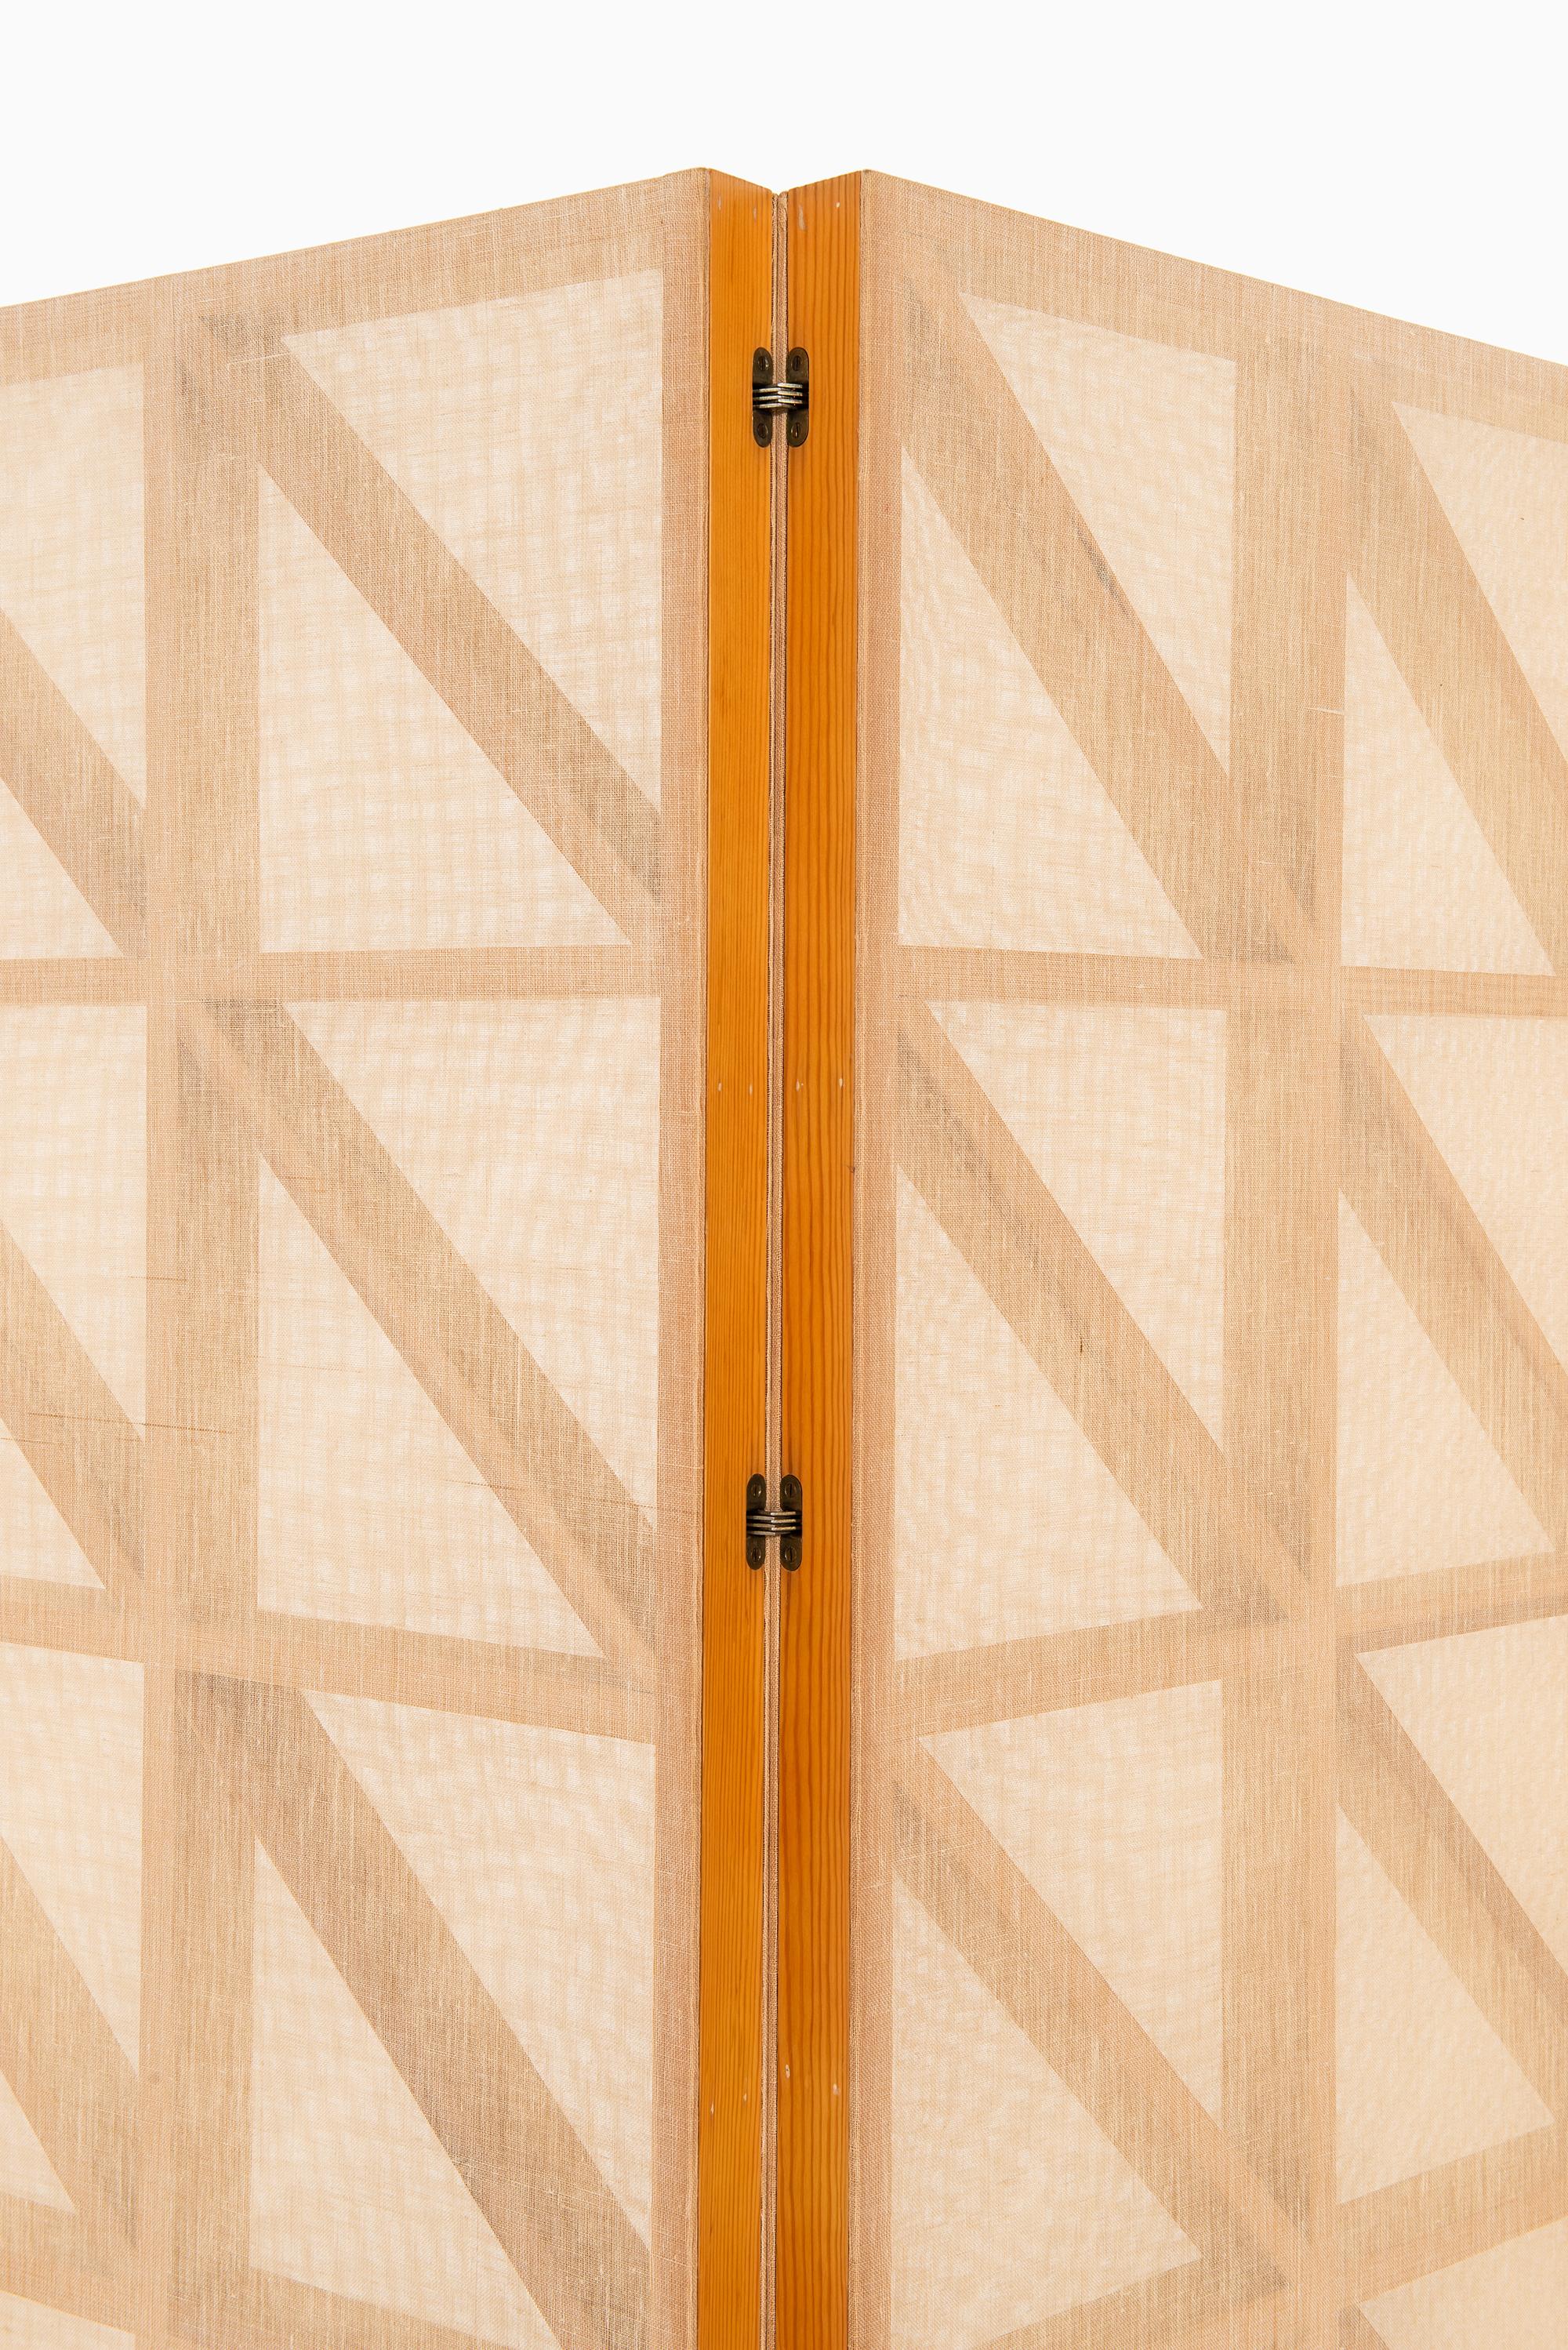 Mid-20th Century Folding Screen / Room Divider Produced in Sweden